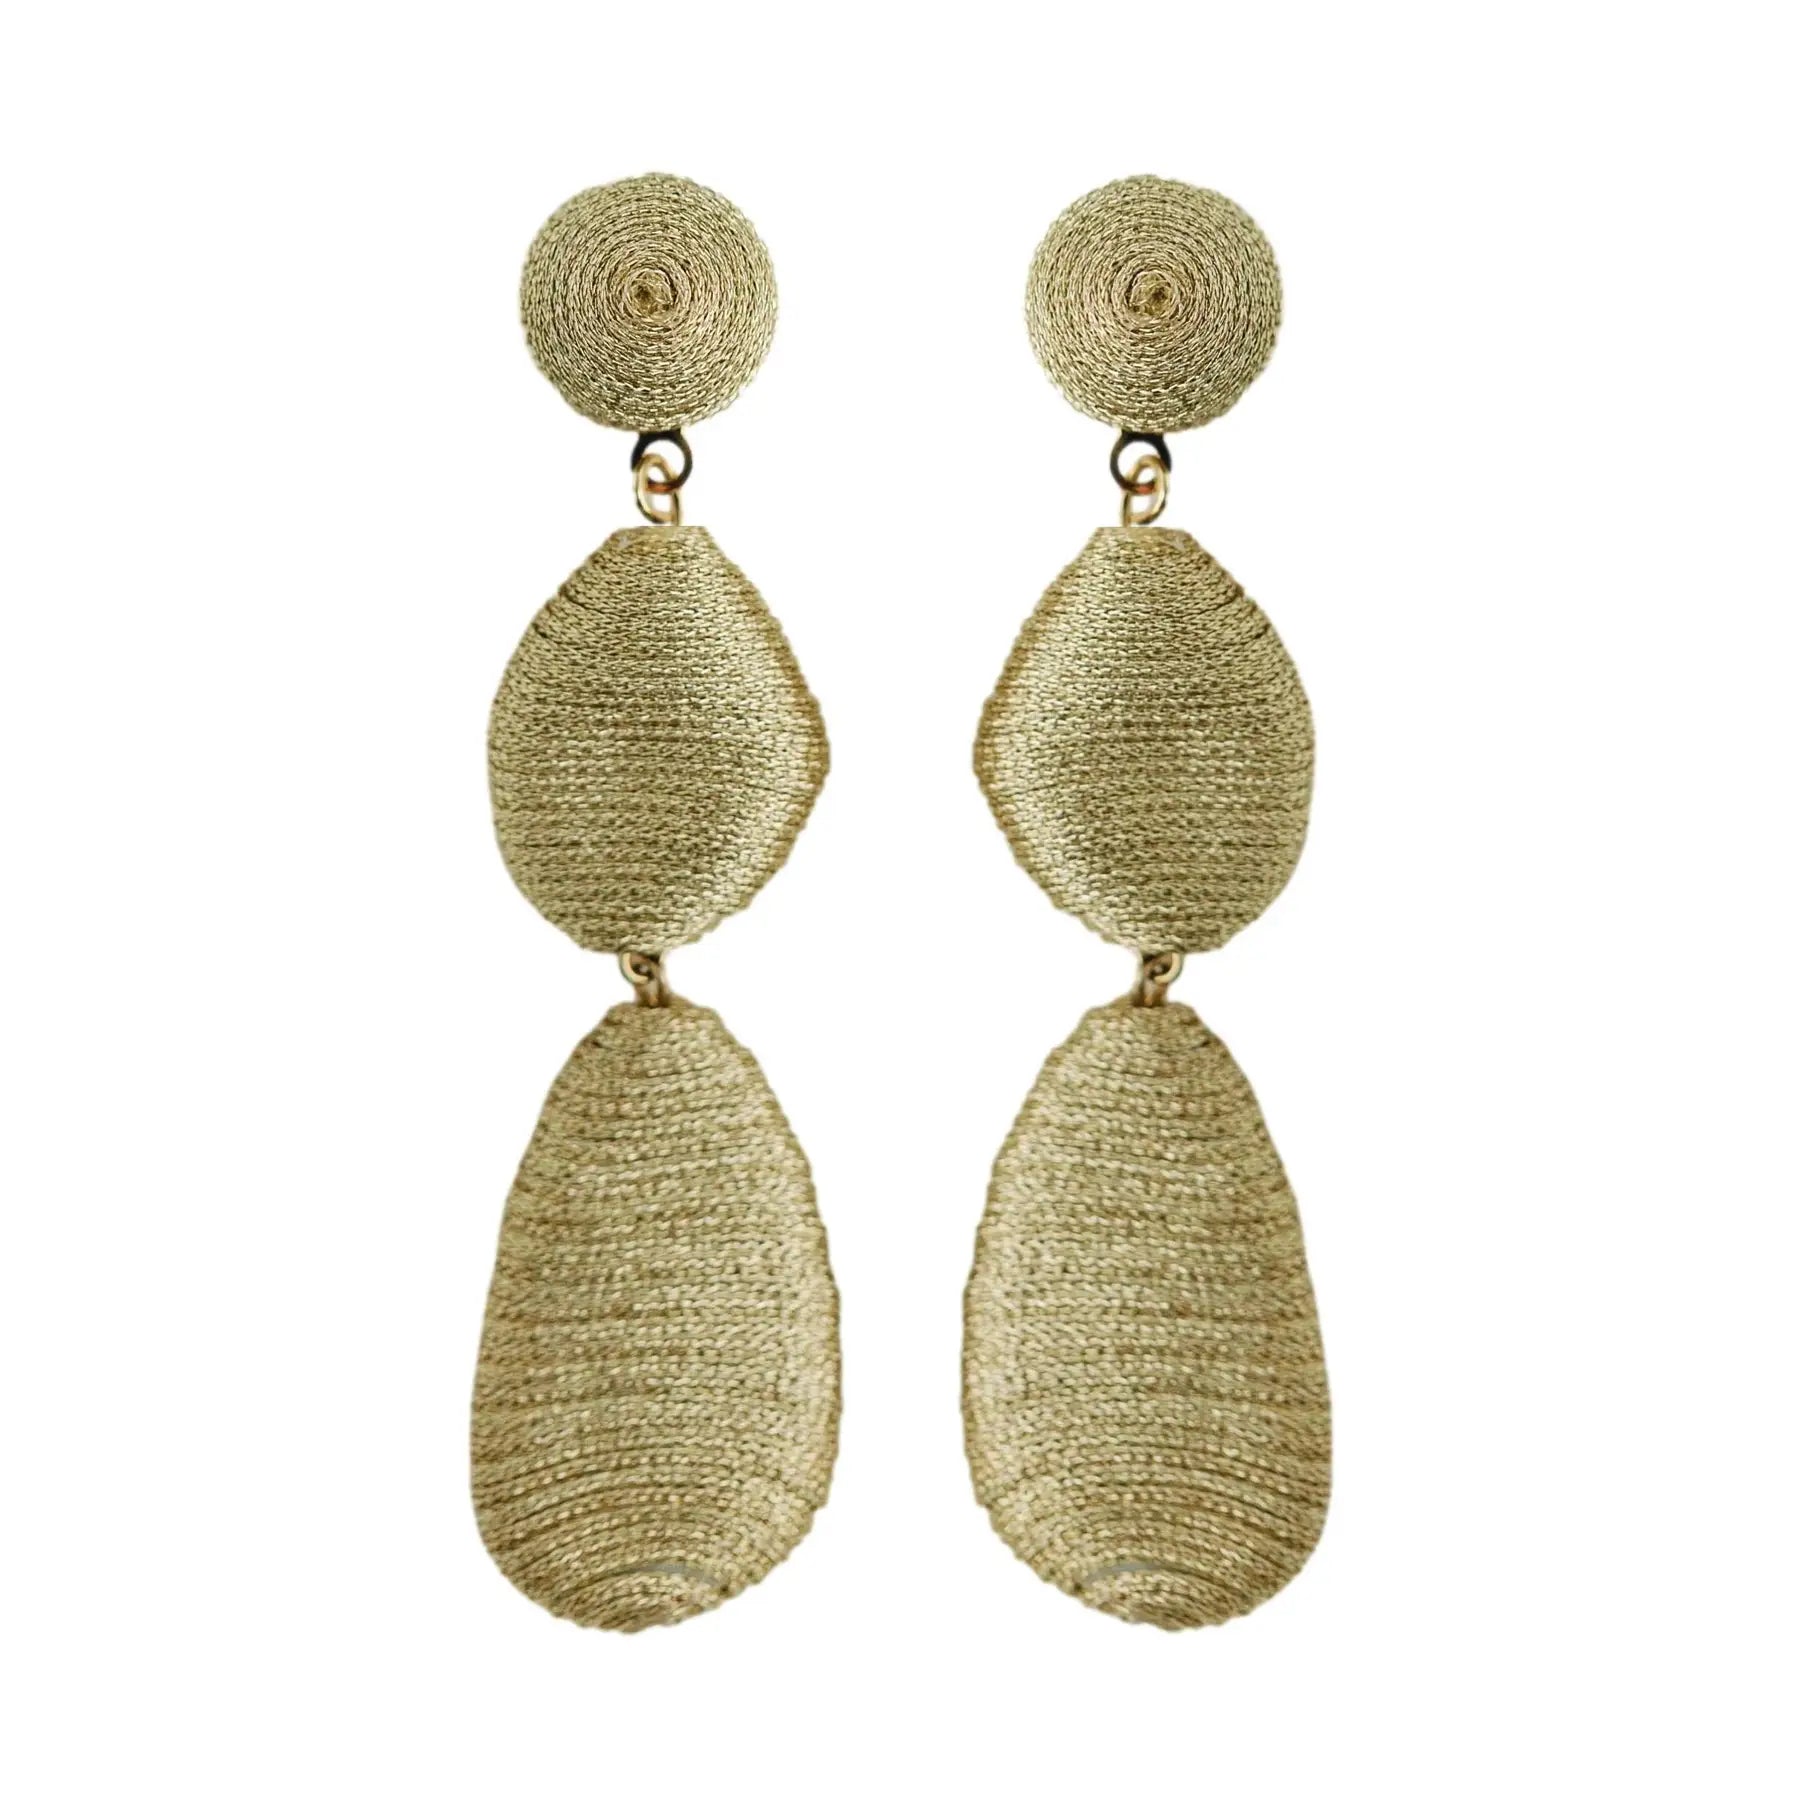 Gold Lido Statement Drop Earrings-110 Jewelry & Hair-St Armands Designs of Sarasota-July & June Women's Fashion Boutique Located in San Antonio, Texas